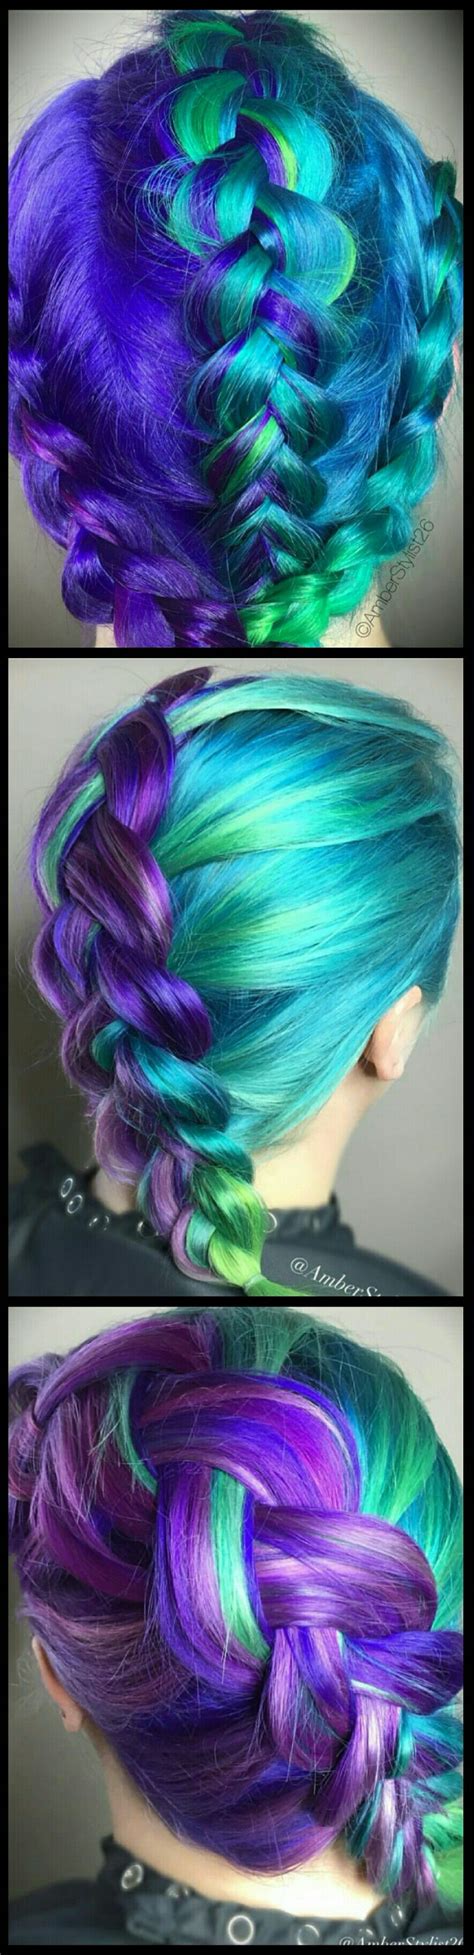 If you apply fantasy purple dye to your green hair, your hair will end up being purple. Blue turquoise purple green braided dyed hair color ...